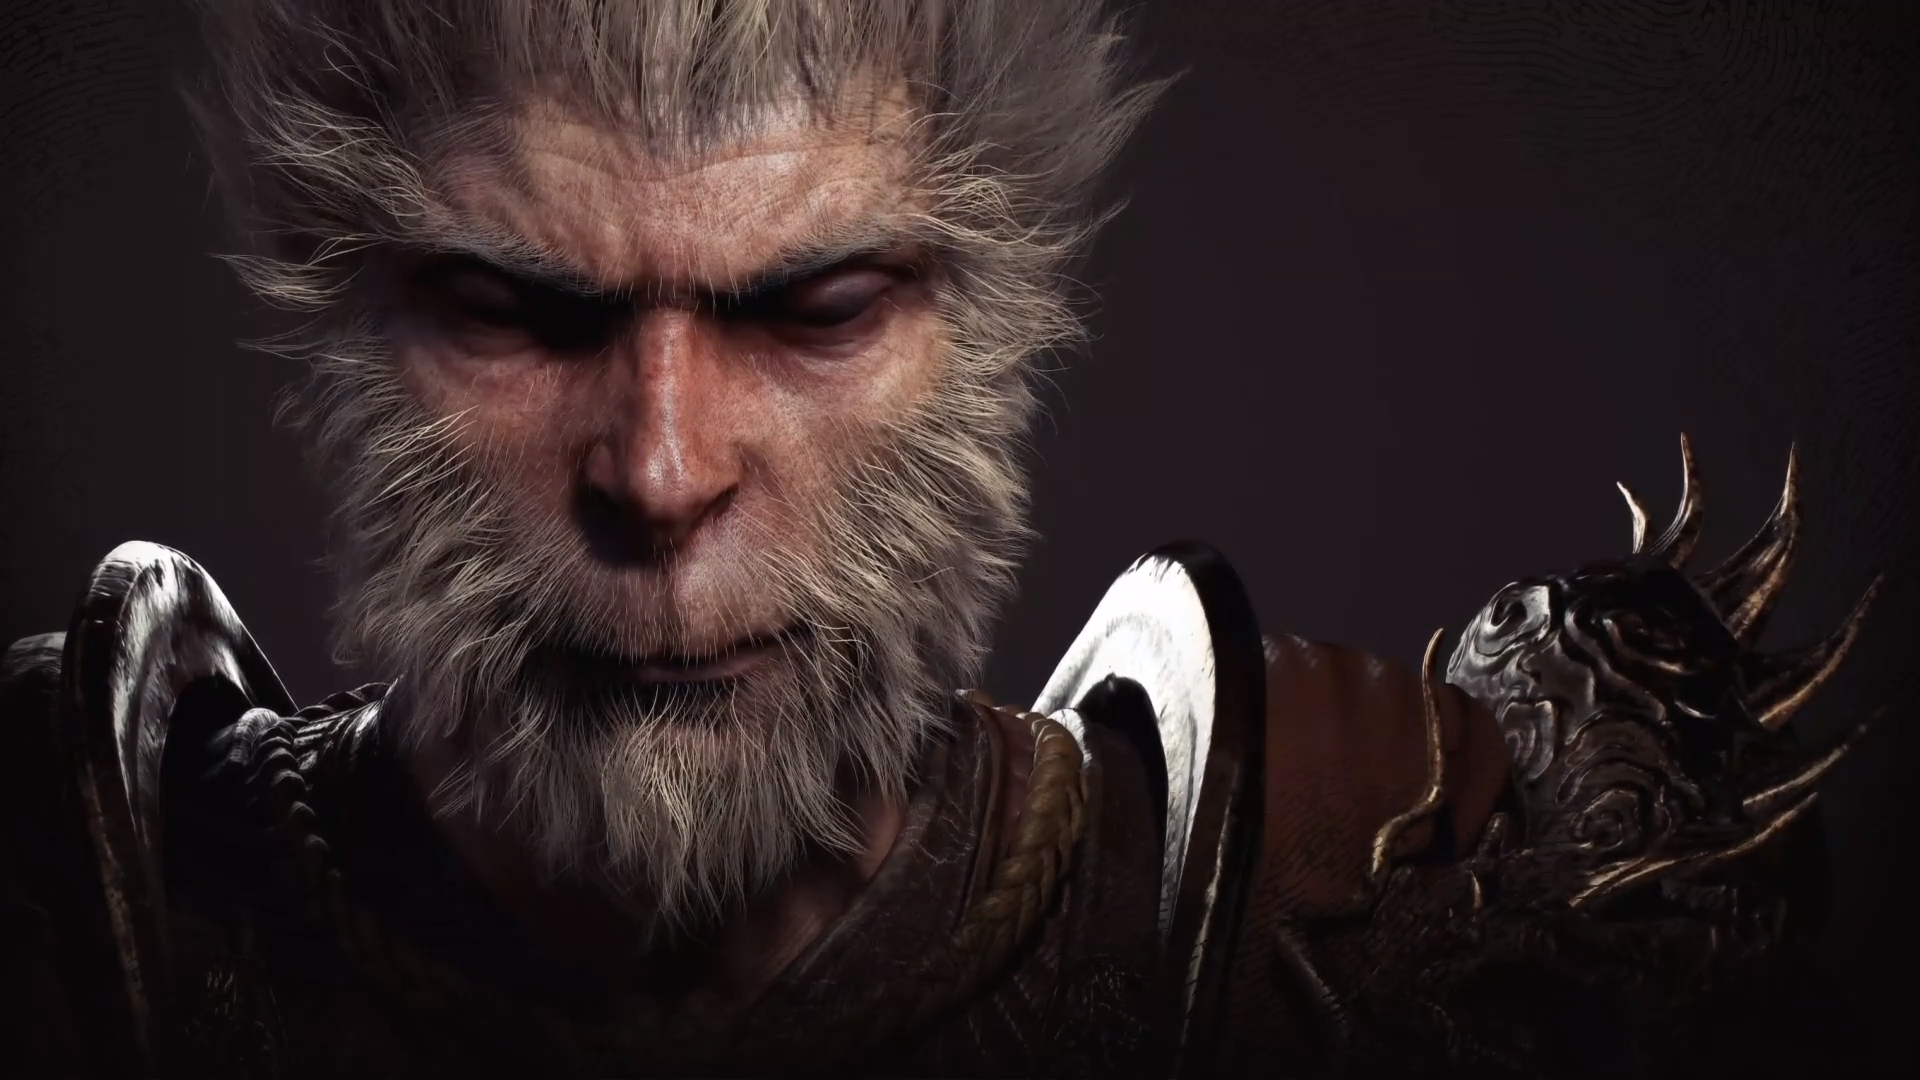 Gorgeous Action RPG Black Myth: Wukong Revealed With Extended Gameplay Trailer